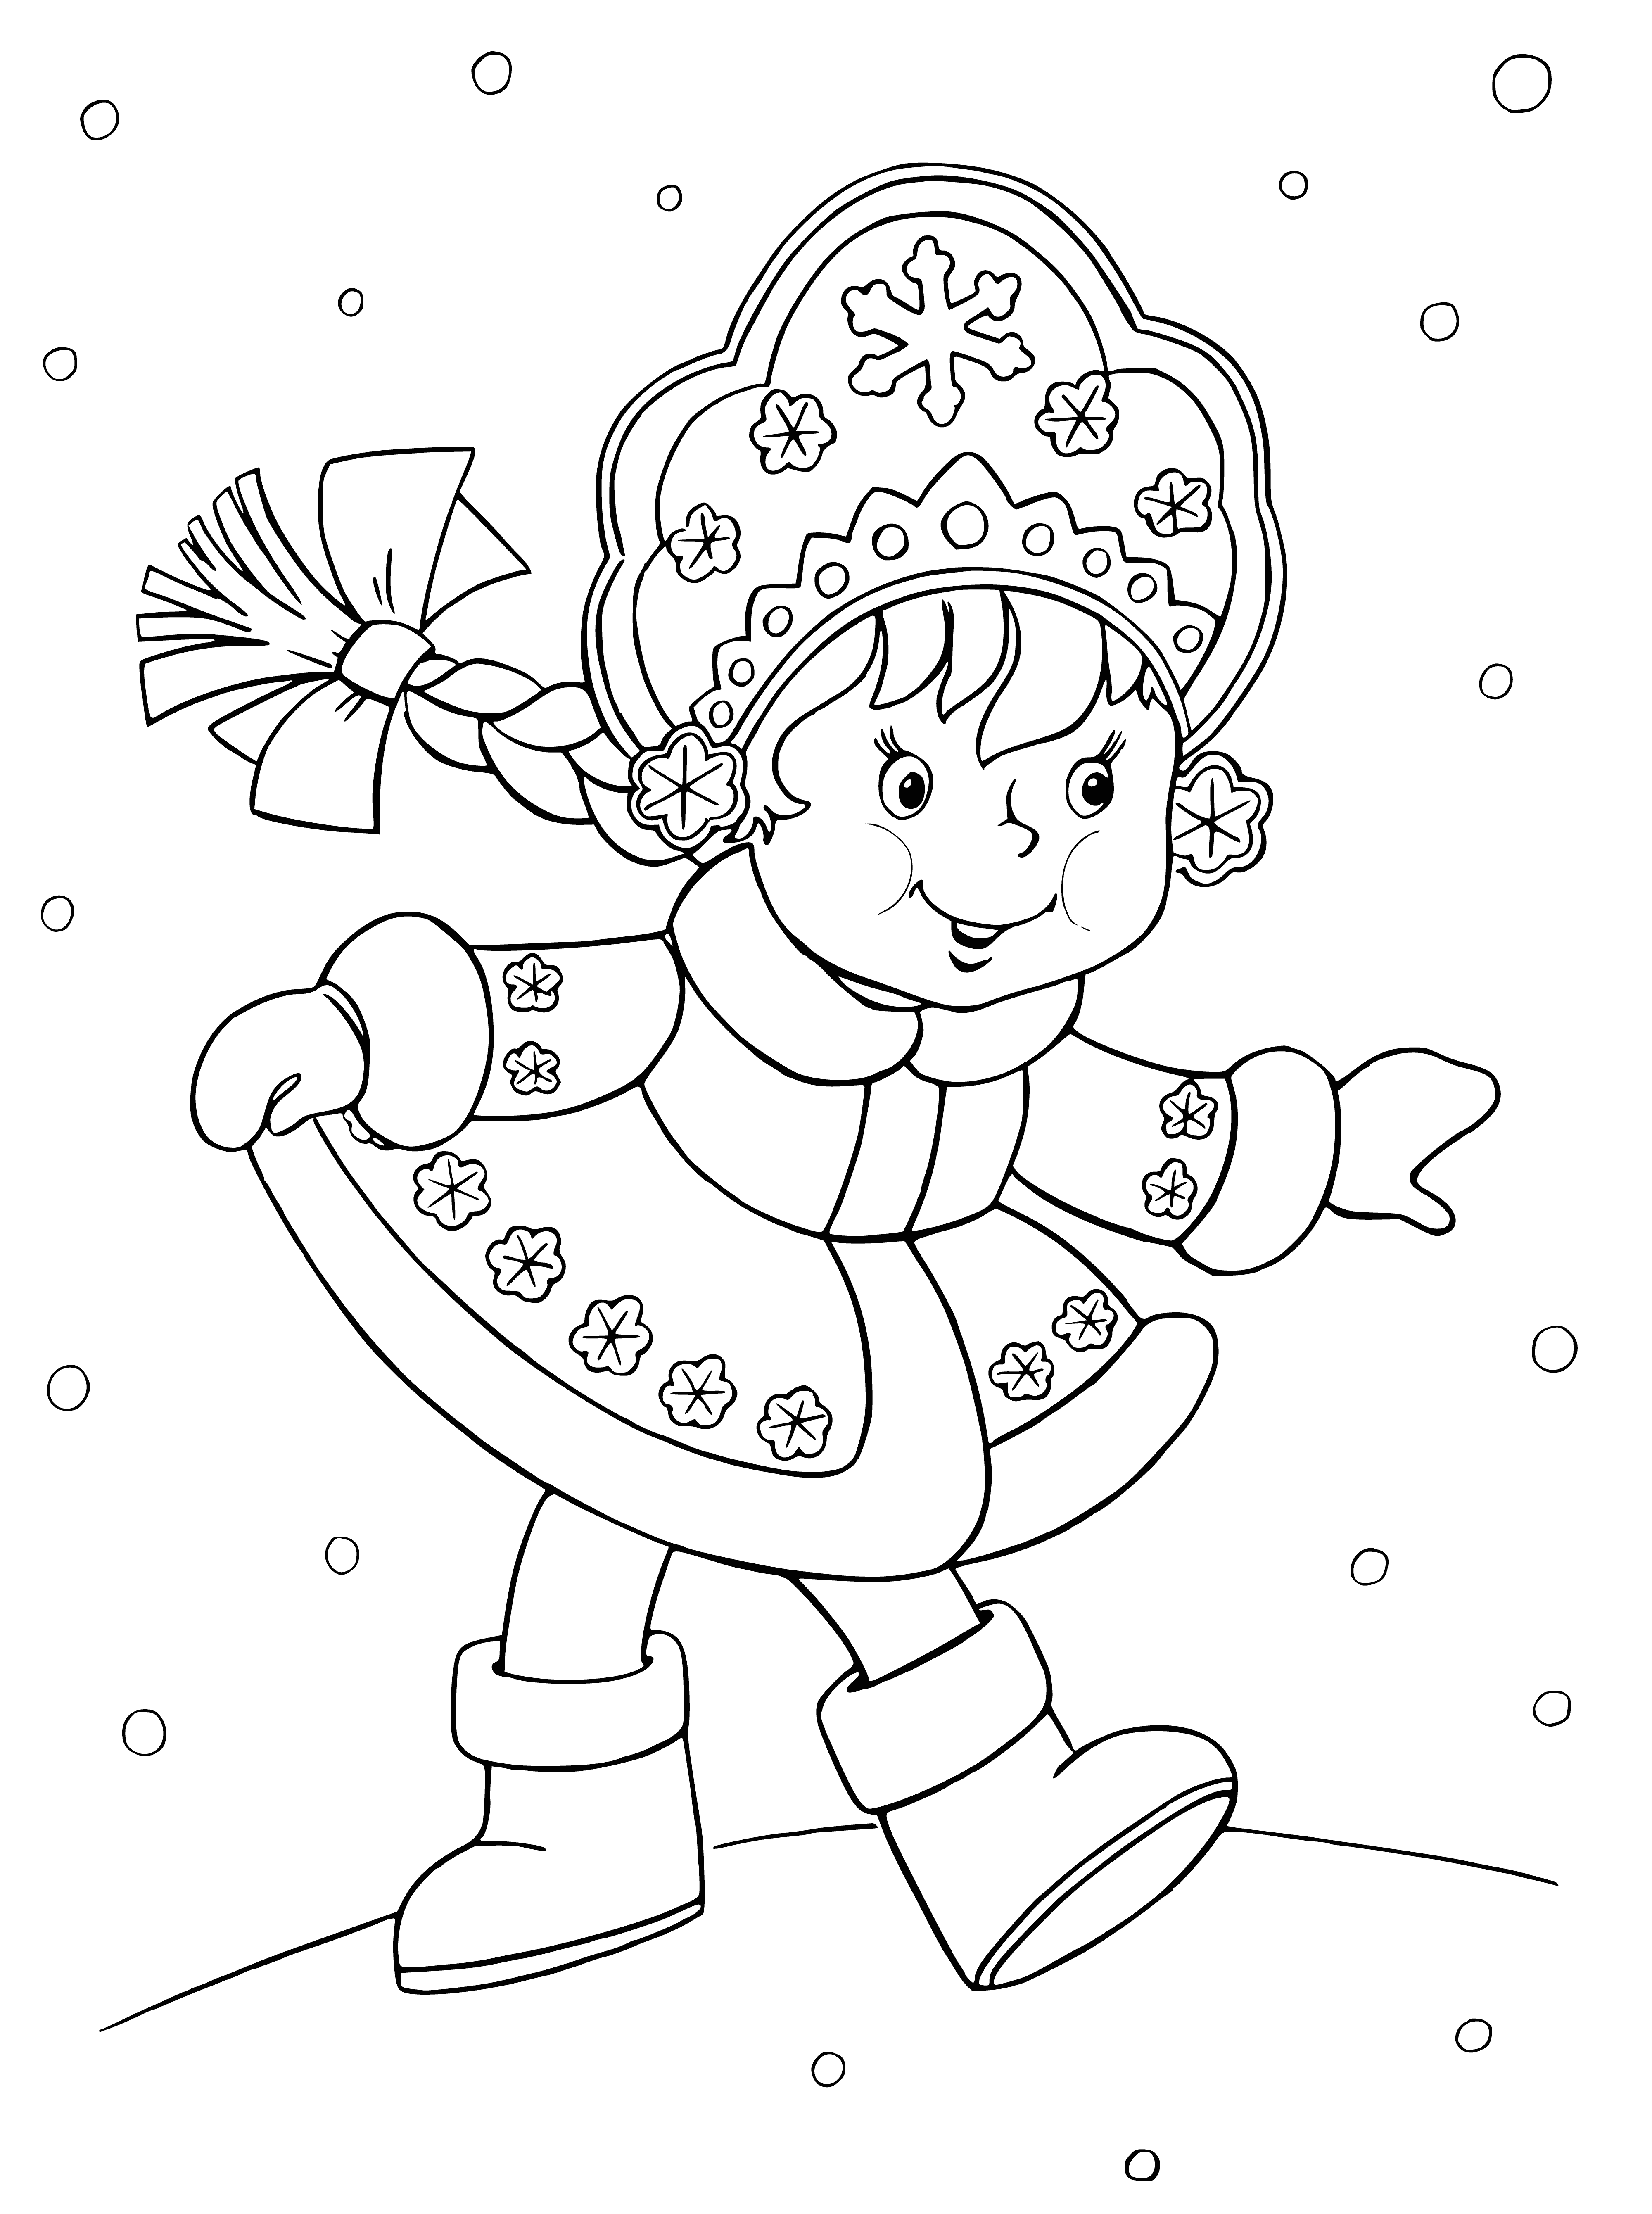 coloring page: A young girl smiles as she looks up at the snow-filled sky wearing a white dress and scarf. #winter